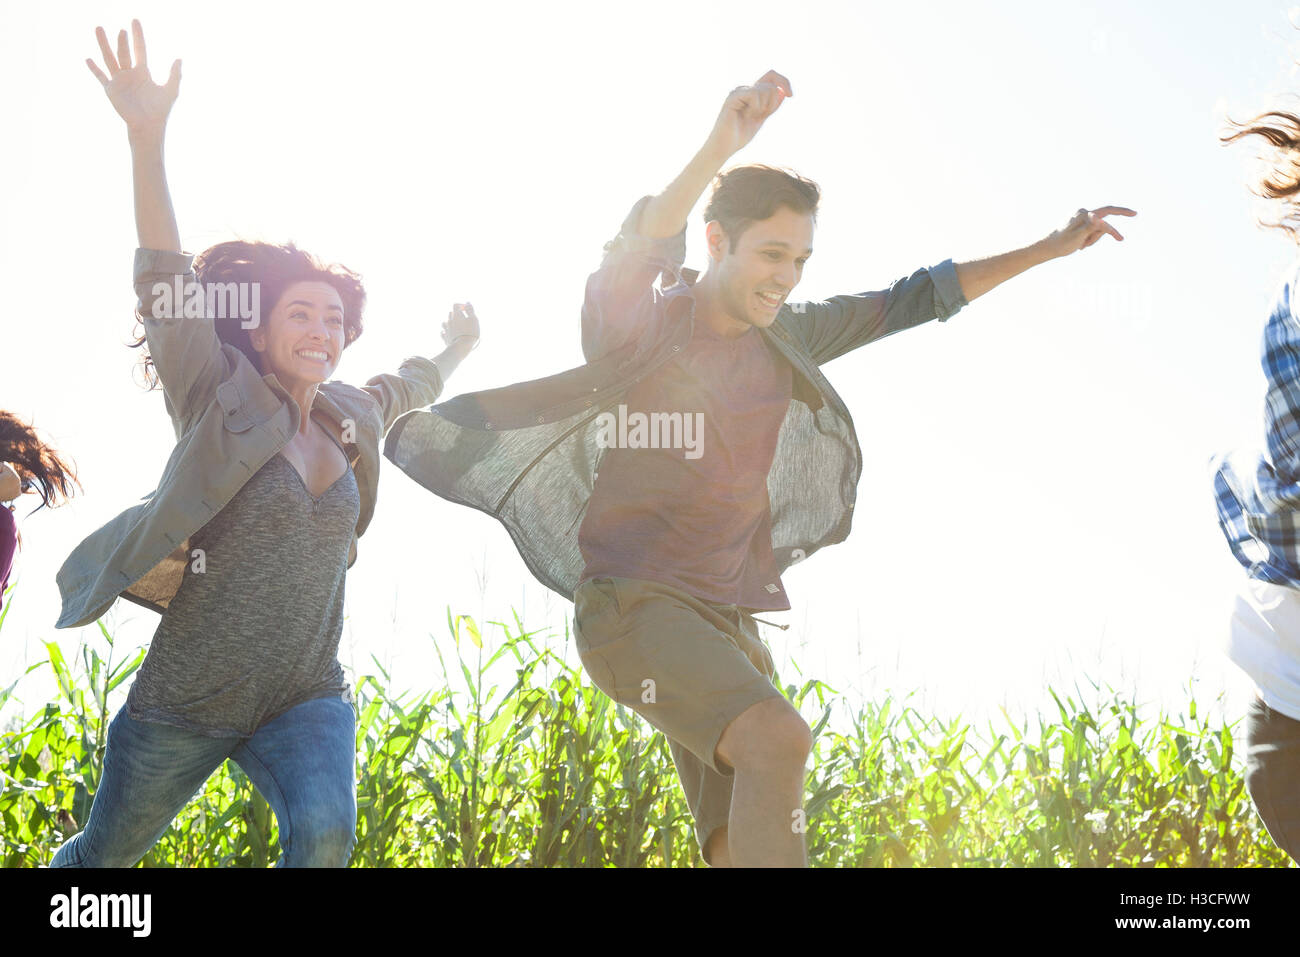 Young people leaping with exuberance Stock Photo